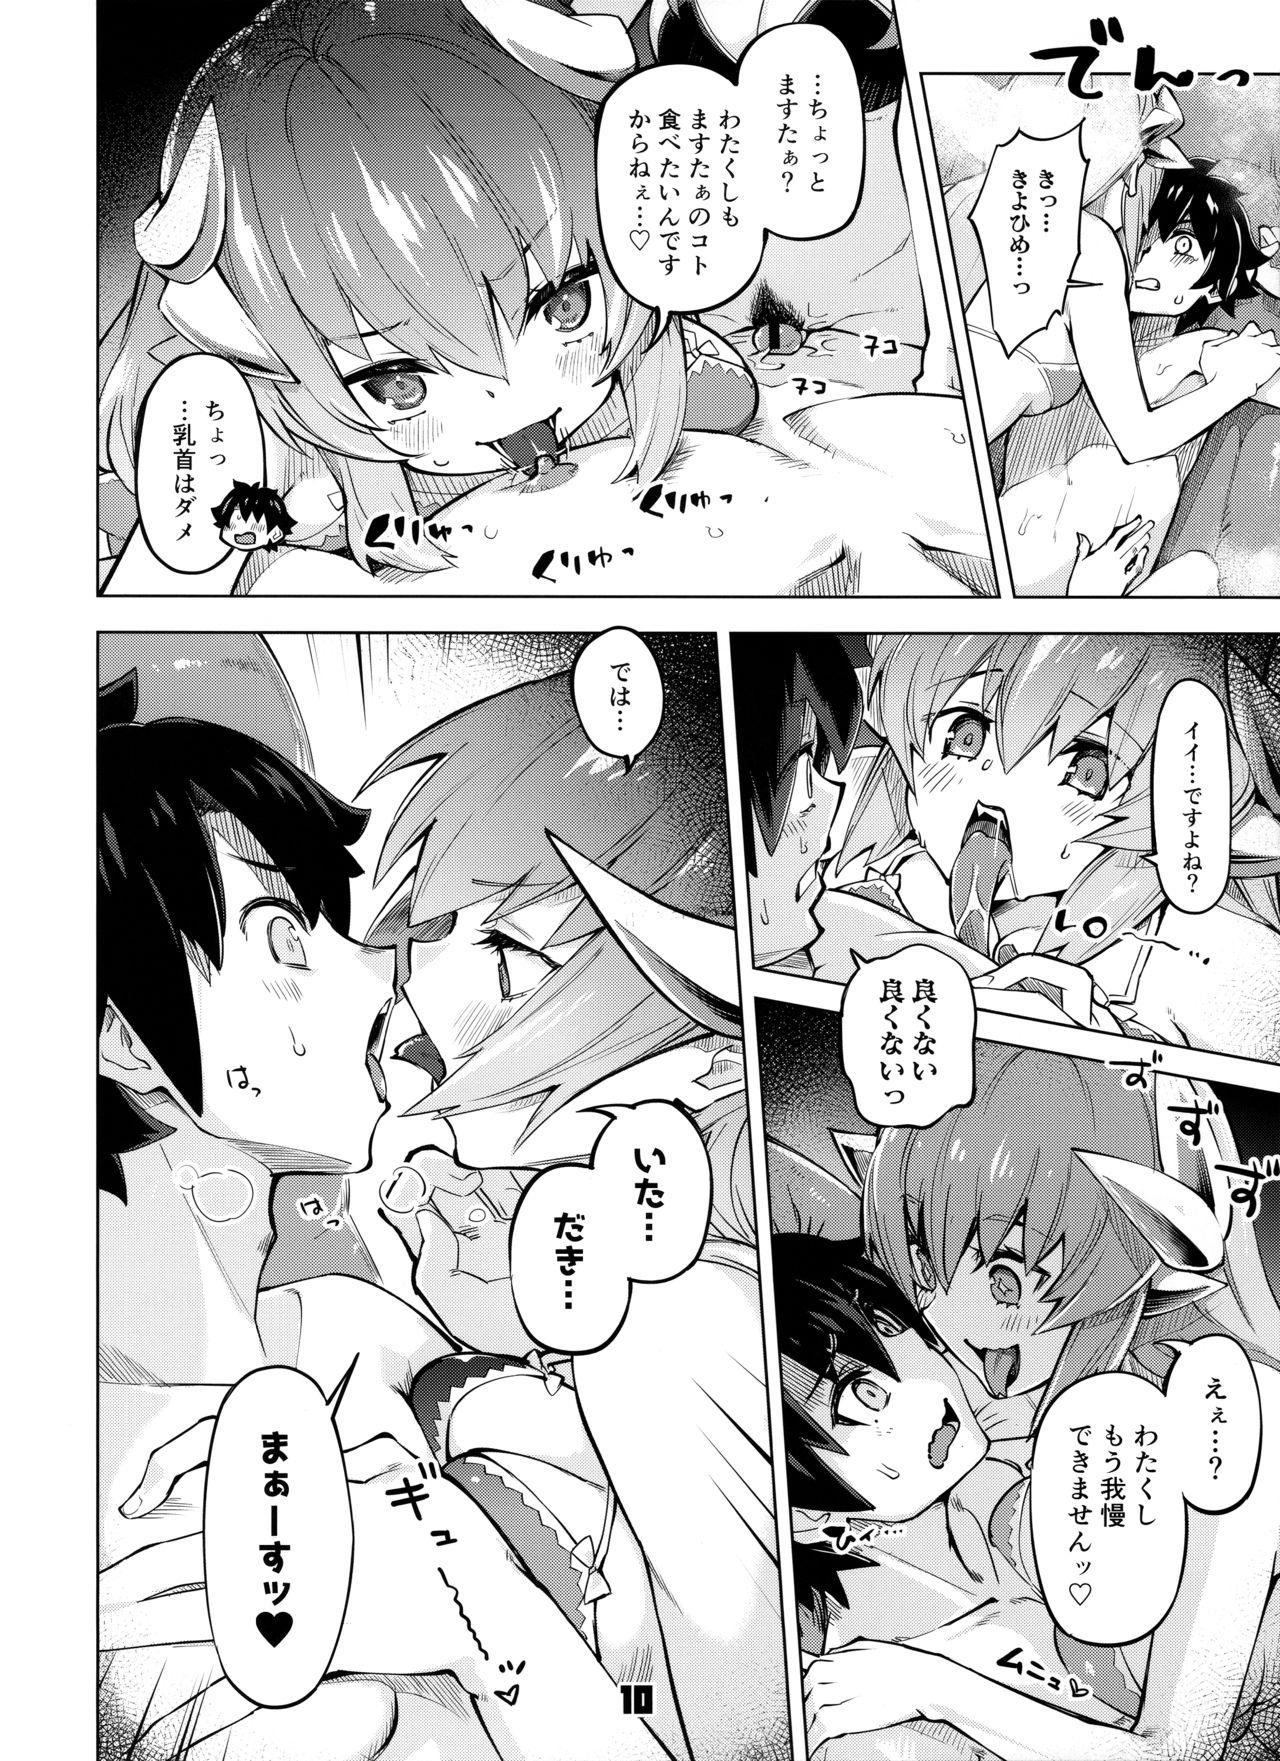 Latinos Sex Shinai to Derarenai My Room 2 - My room can not go out - Fate grand order Delicia - Page 9